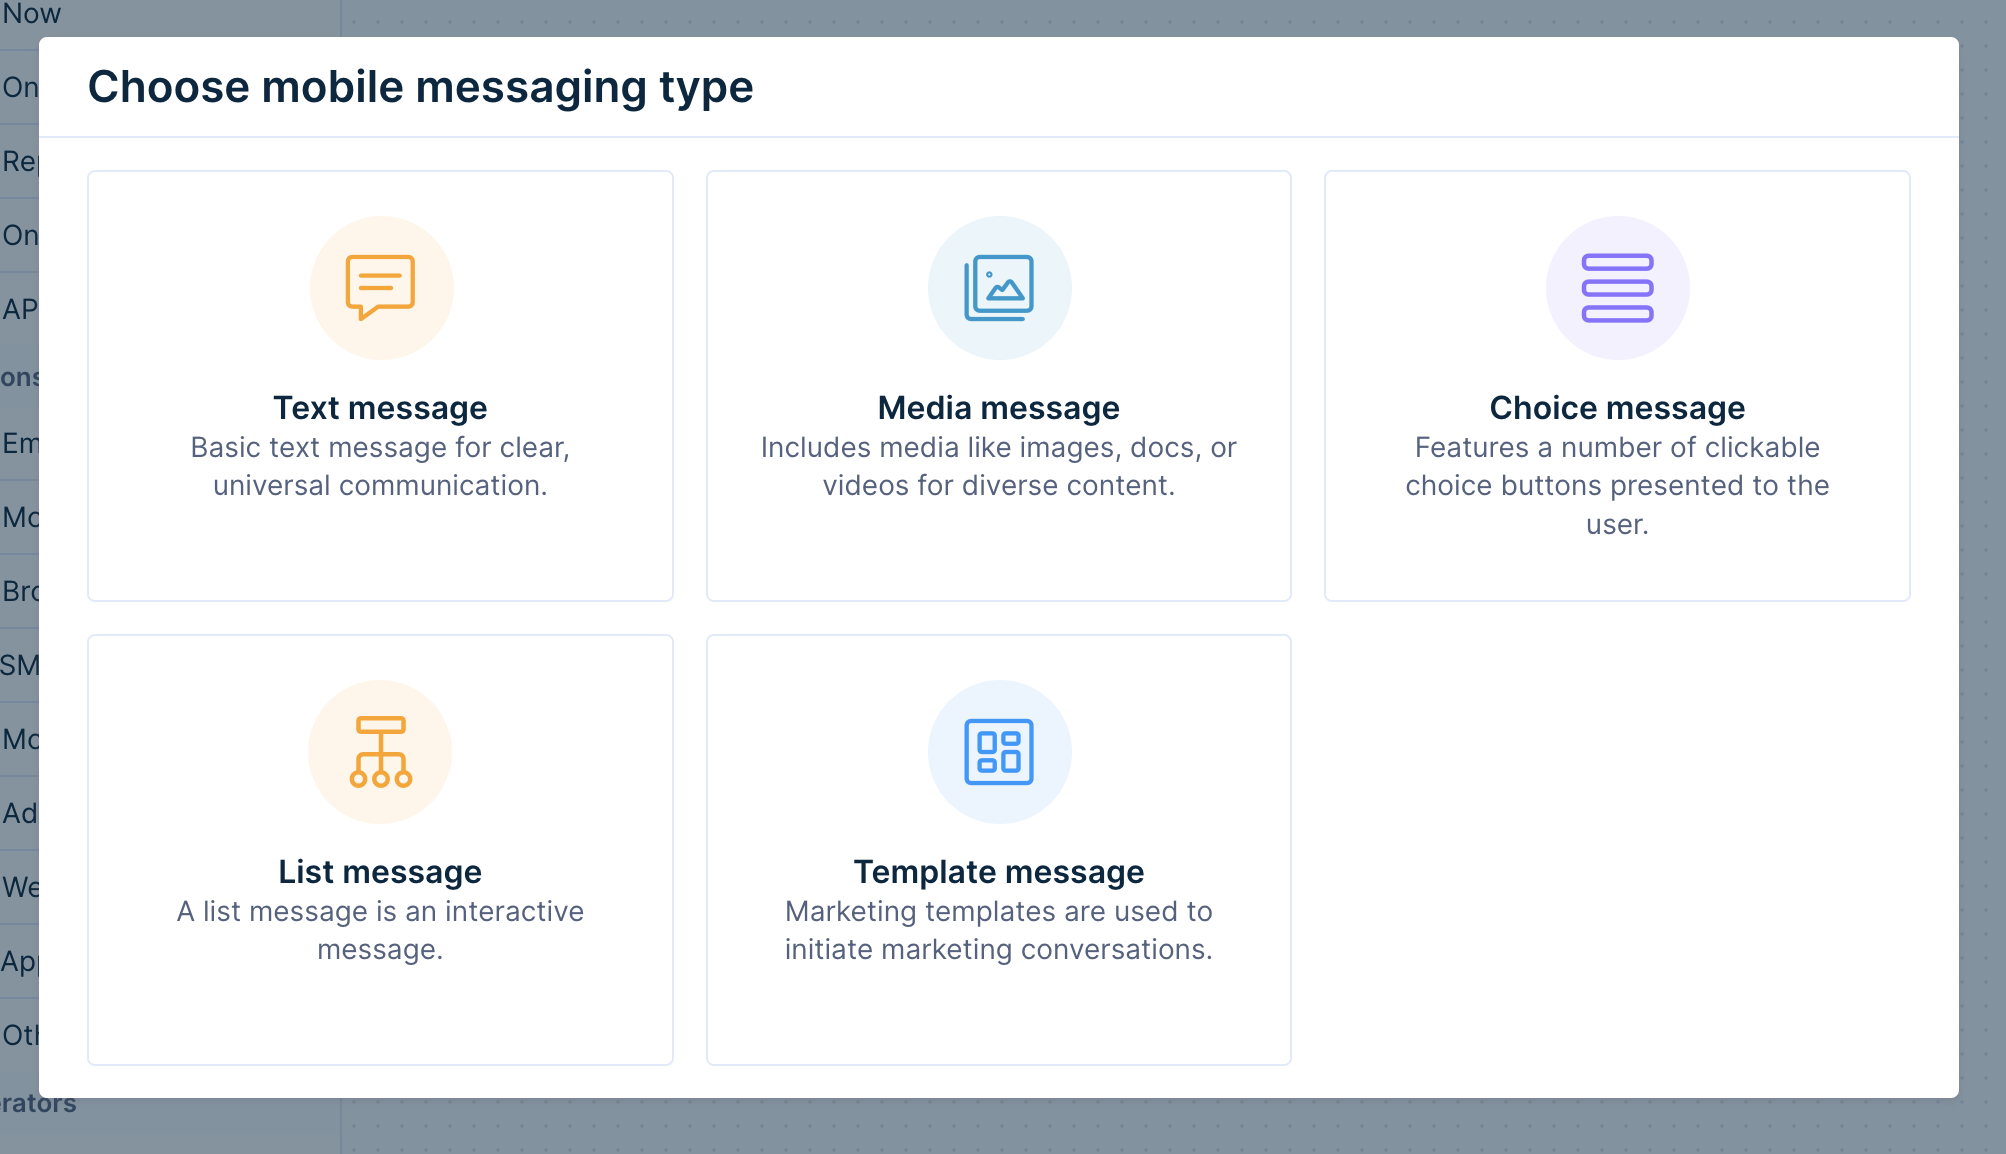 Each of these WhatsApp message types is described below in more detail